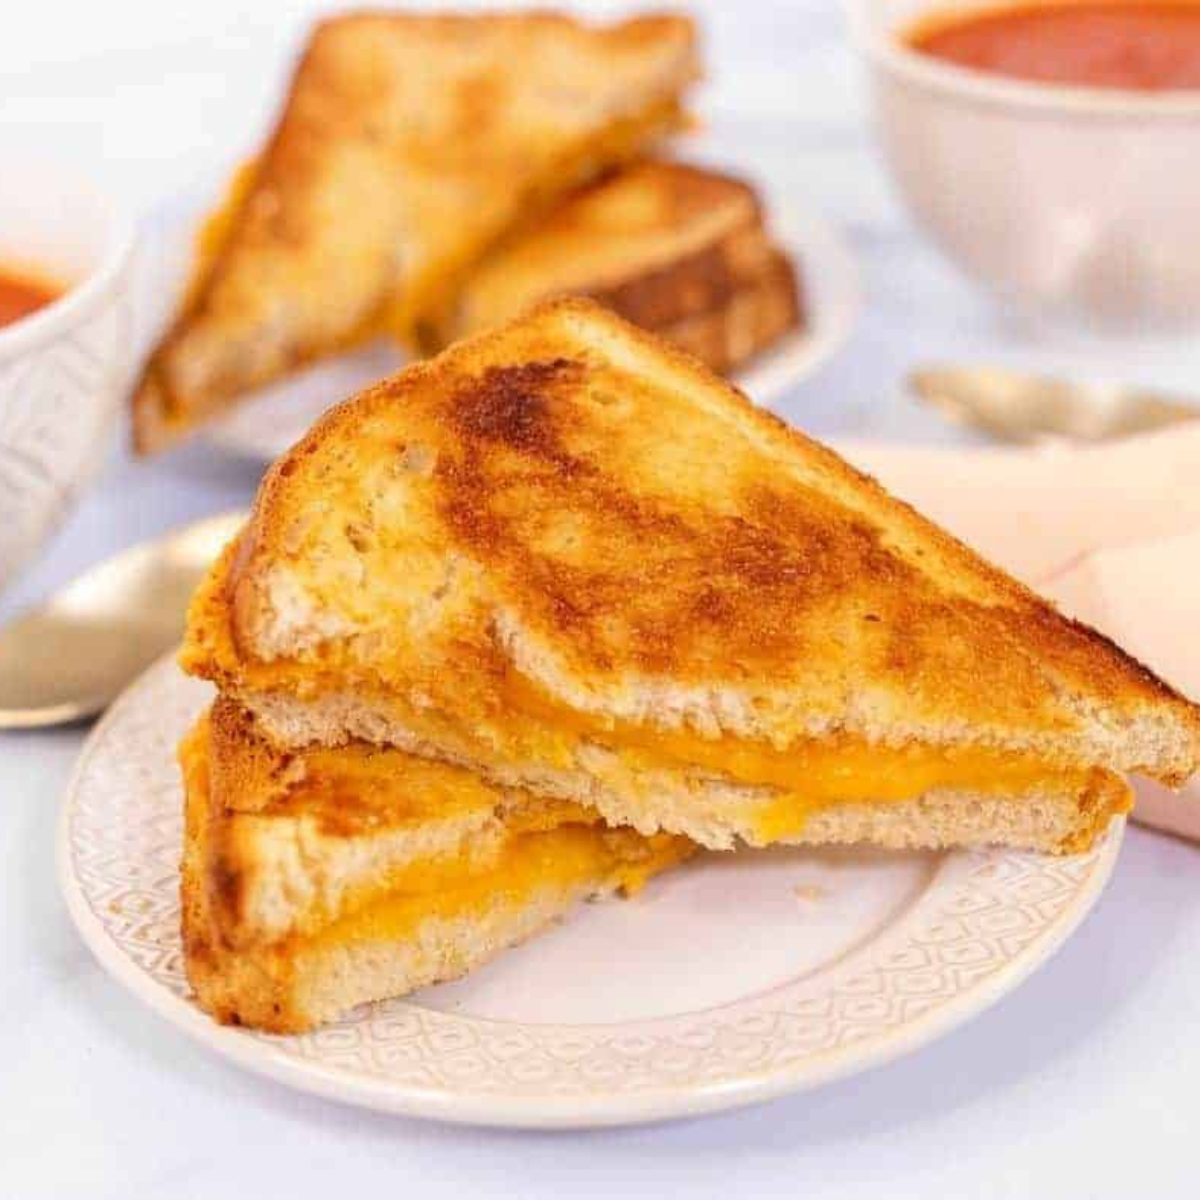 https://forktospoon.com/wp-content/uploads/2021/01/The-Best-Air-Fryer-Grilled-Cheese-Sandwich.png